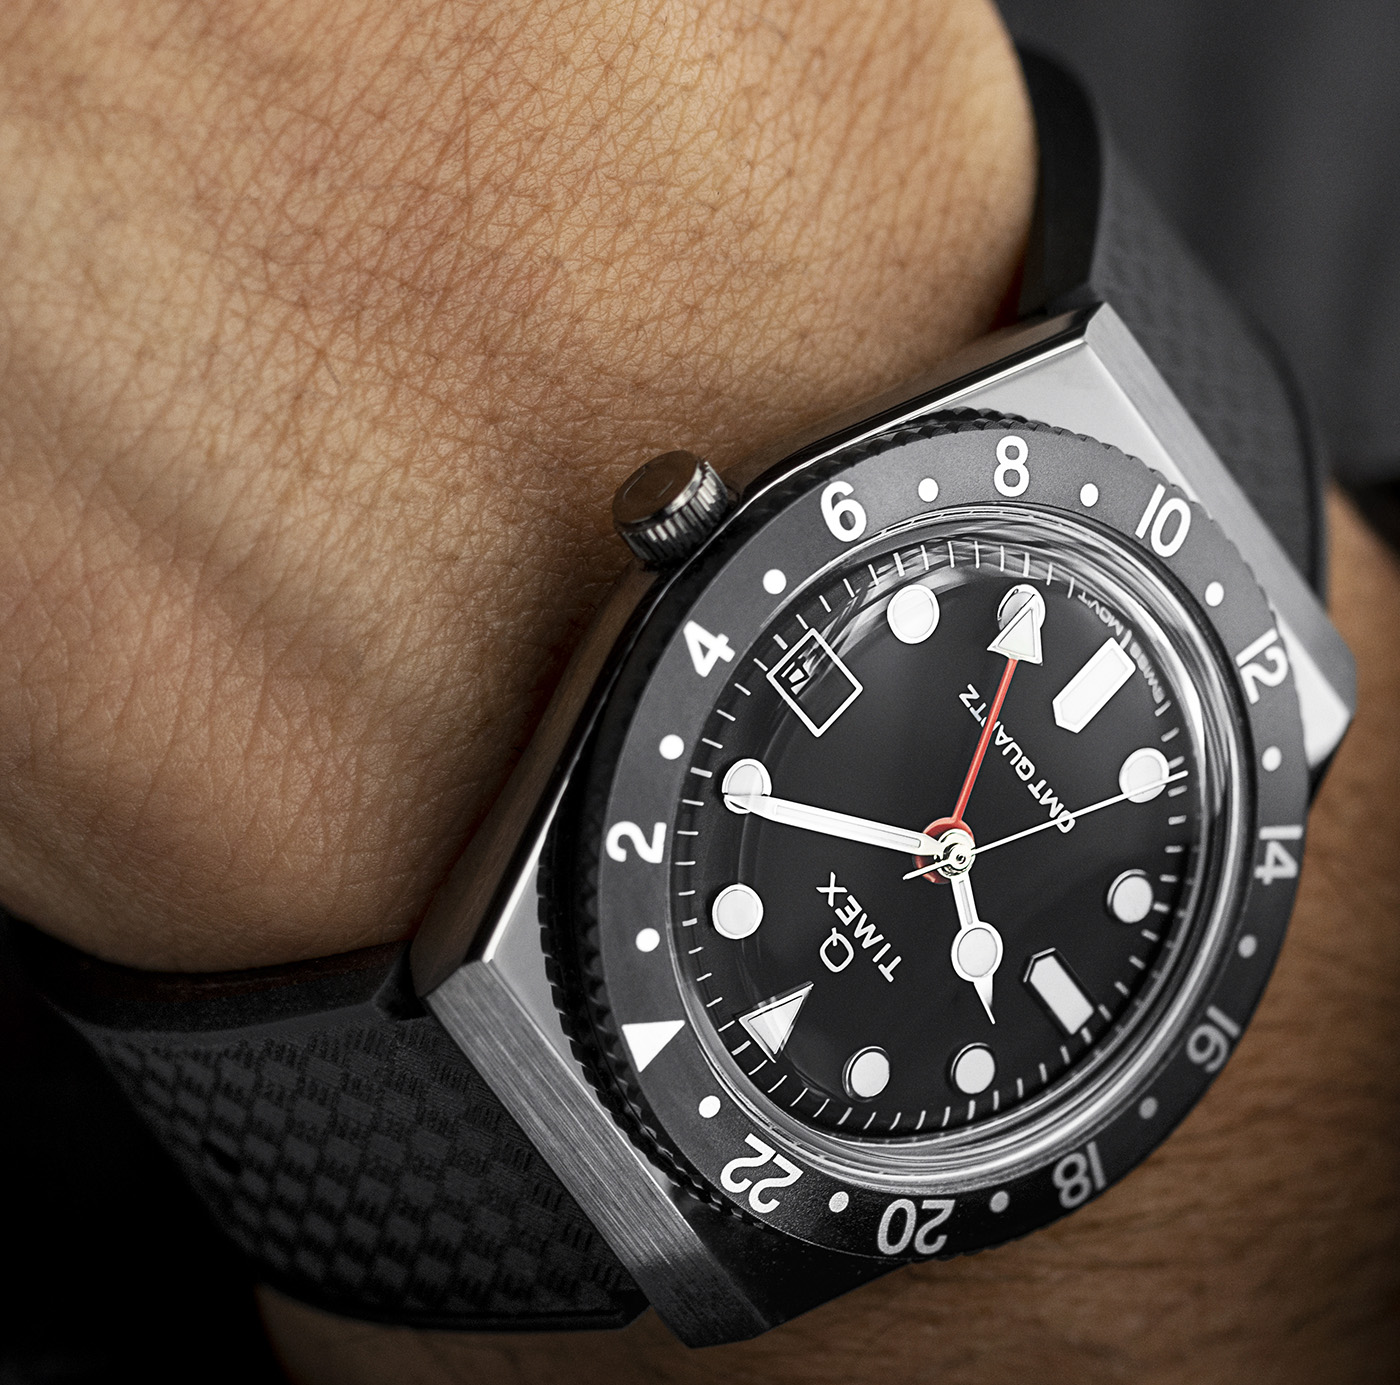 Timex Debuts Q Timex GMT Watches | aBlogtoWatch